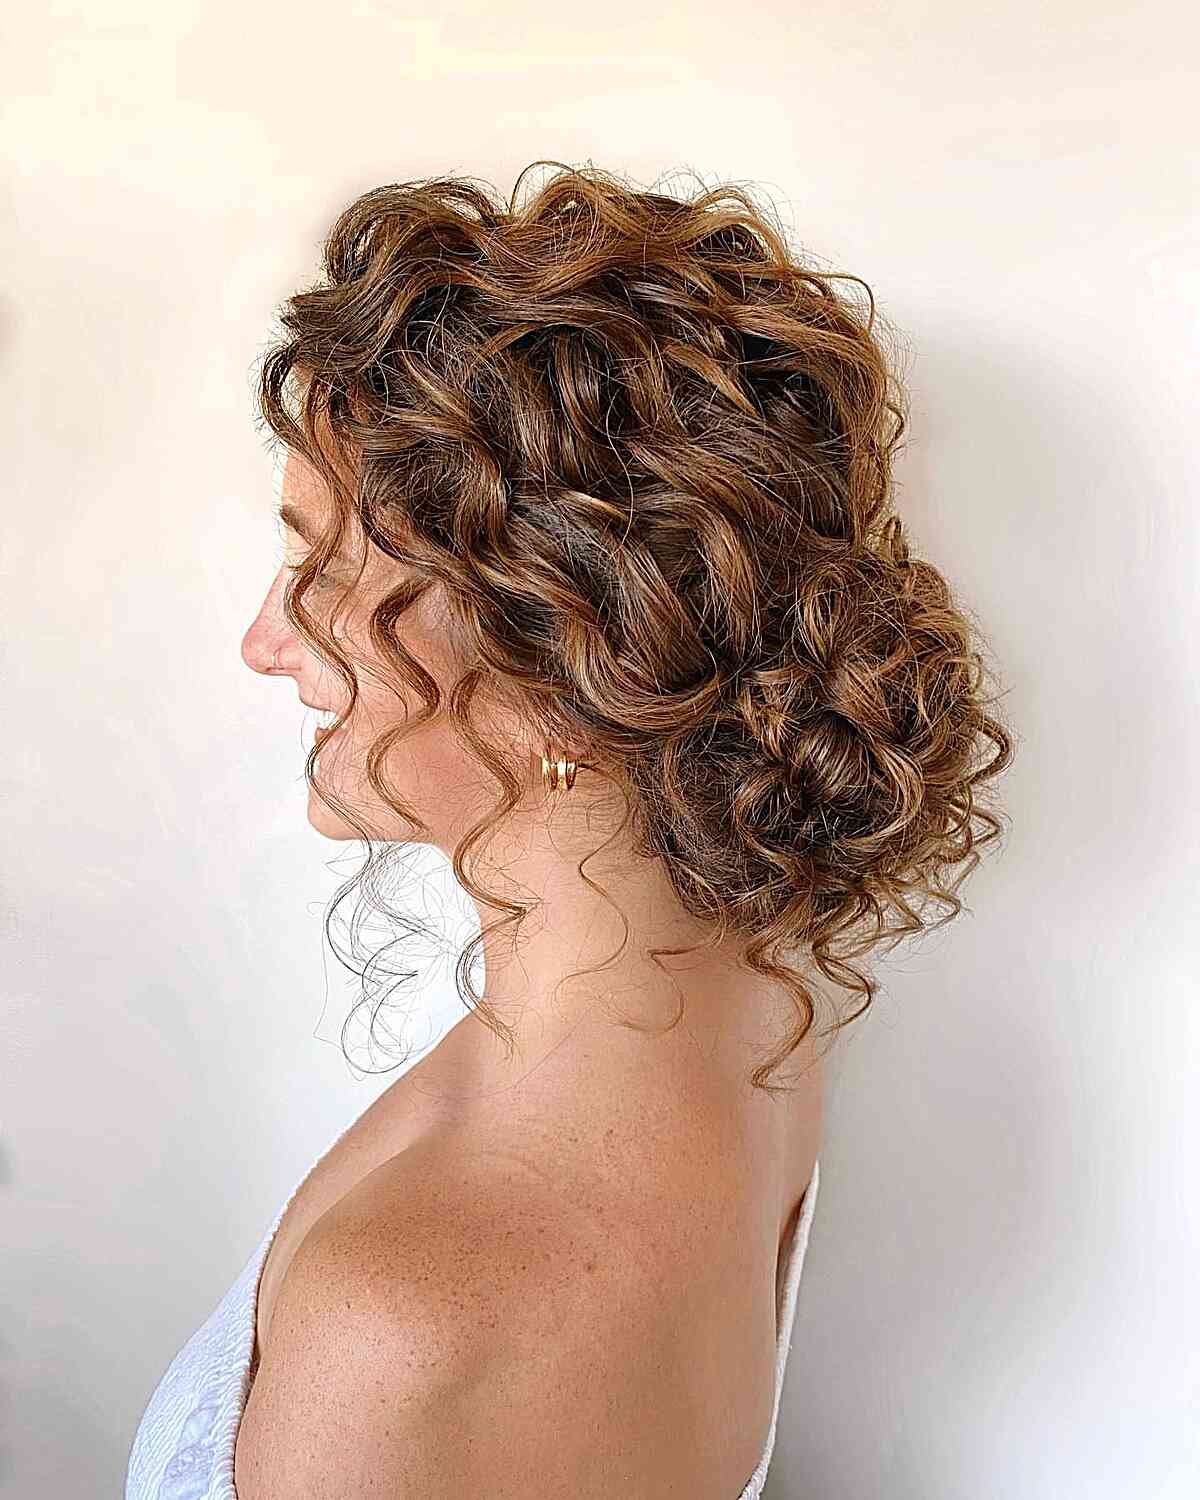 Half up half down curl hairstyles - partial updo wedding hairstyles